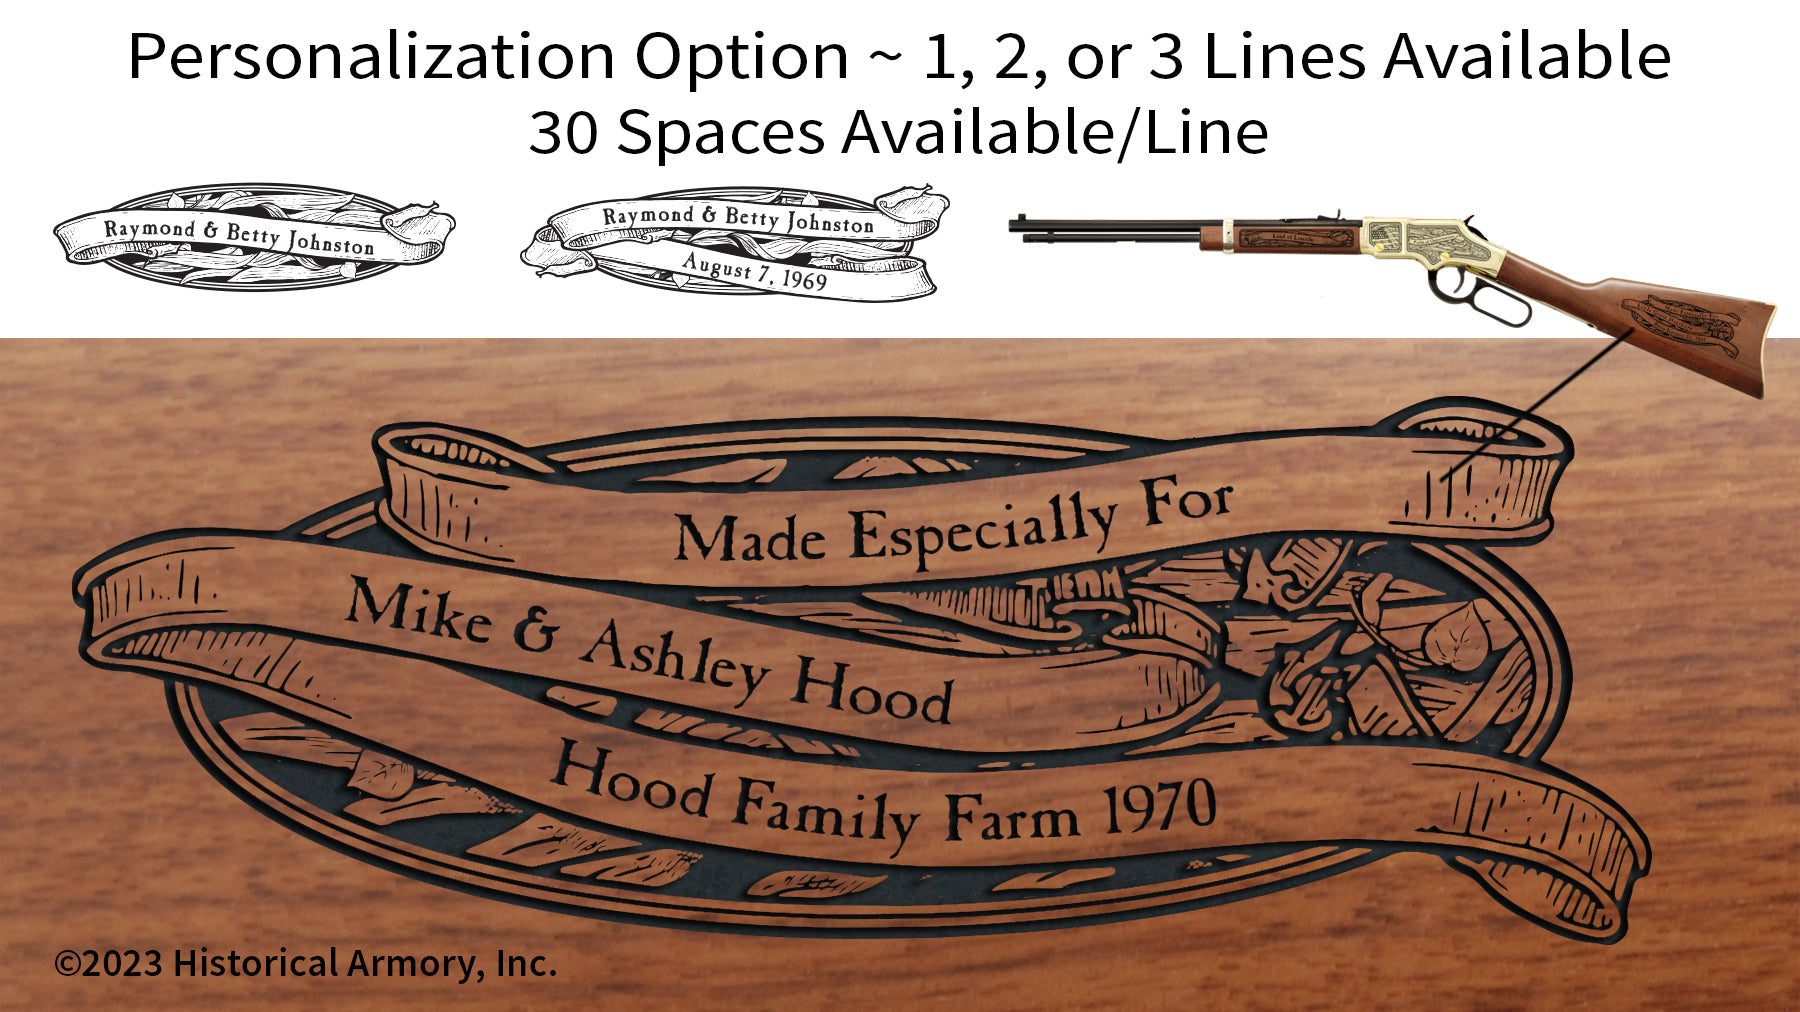 Illinois Agricultural Heritage Engraved Rifle Personalization